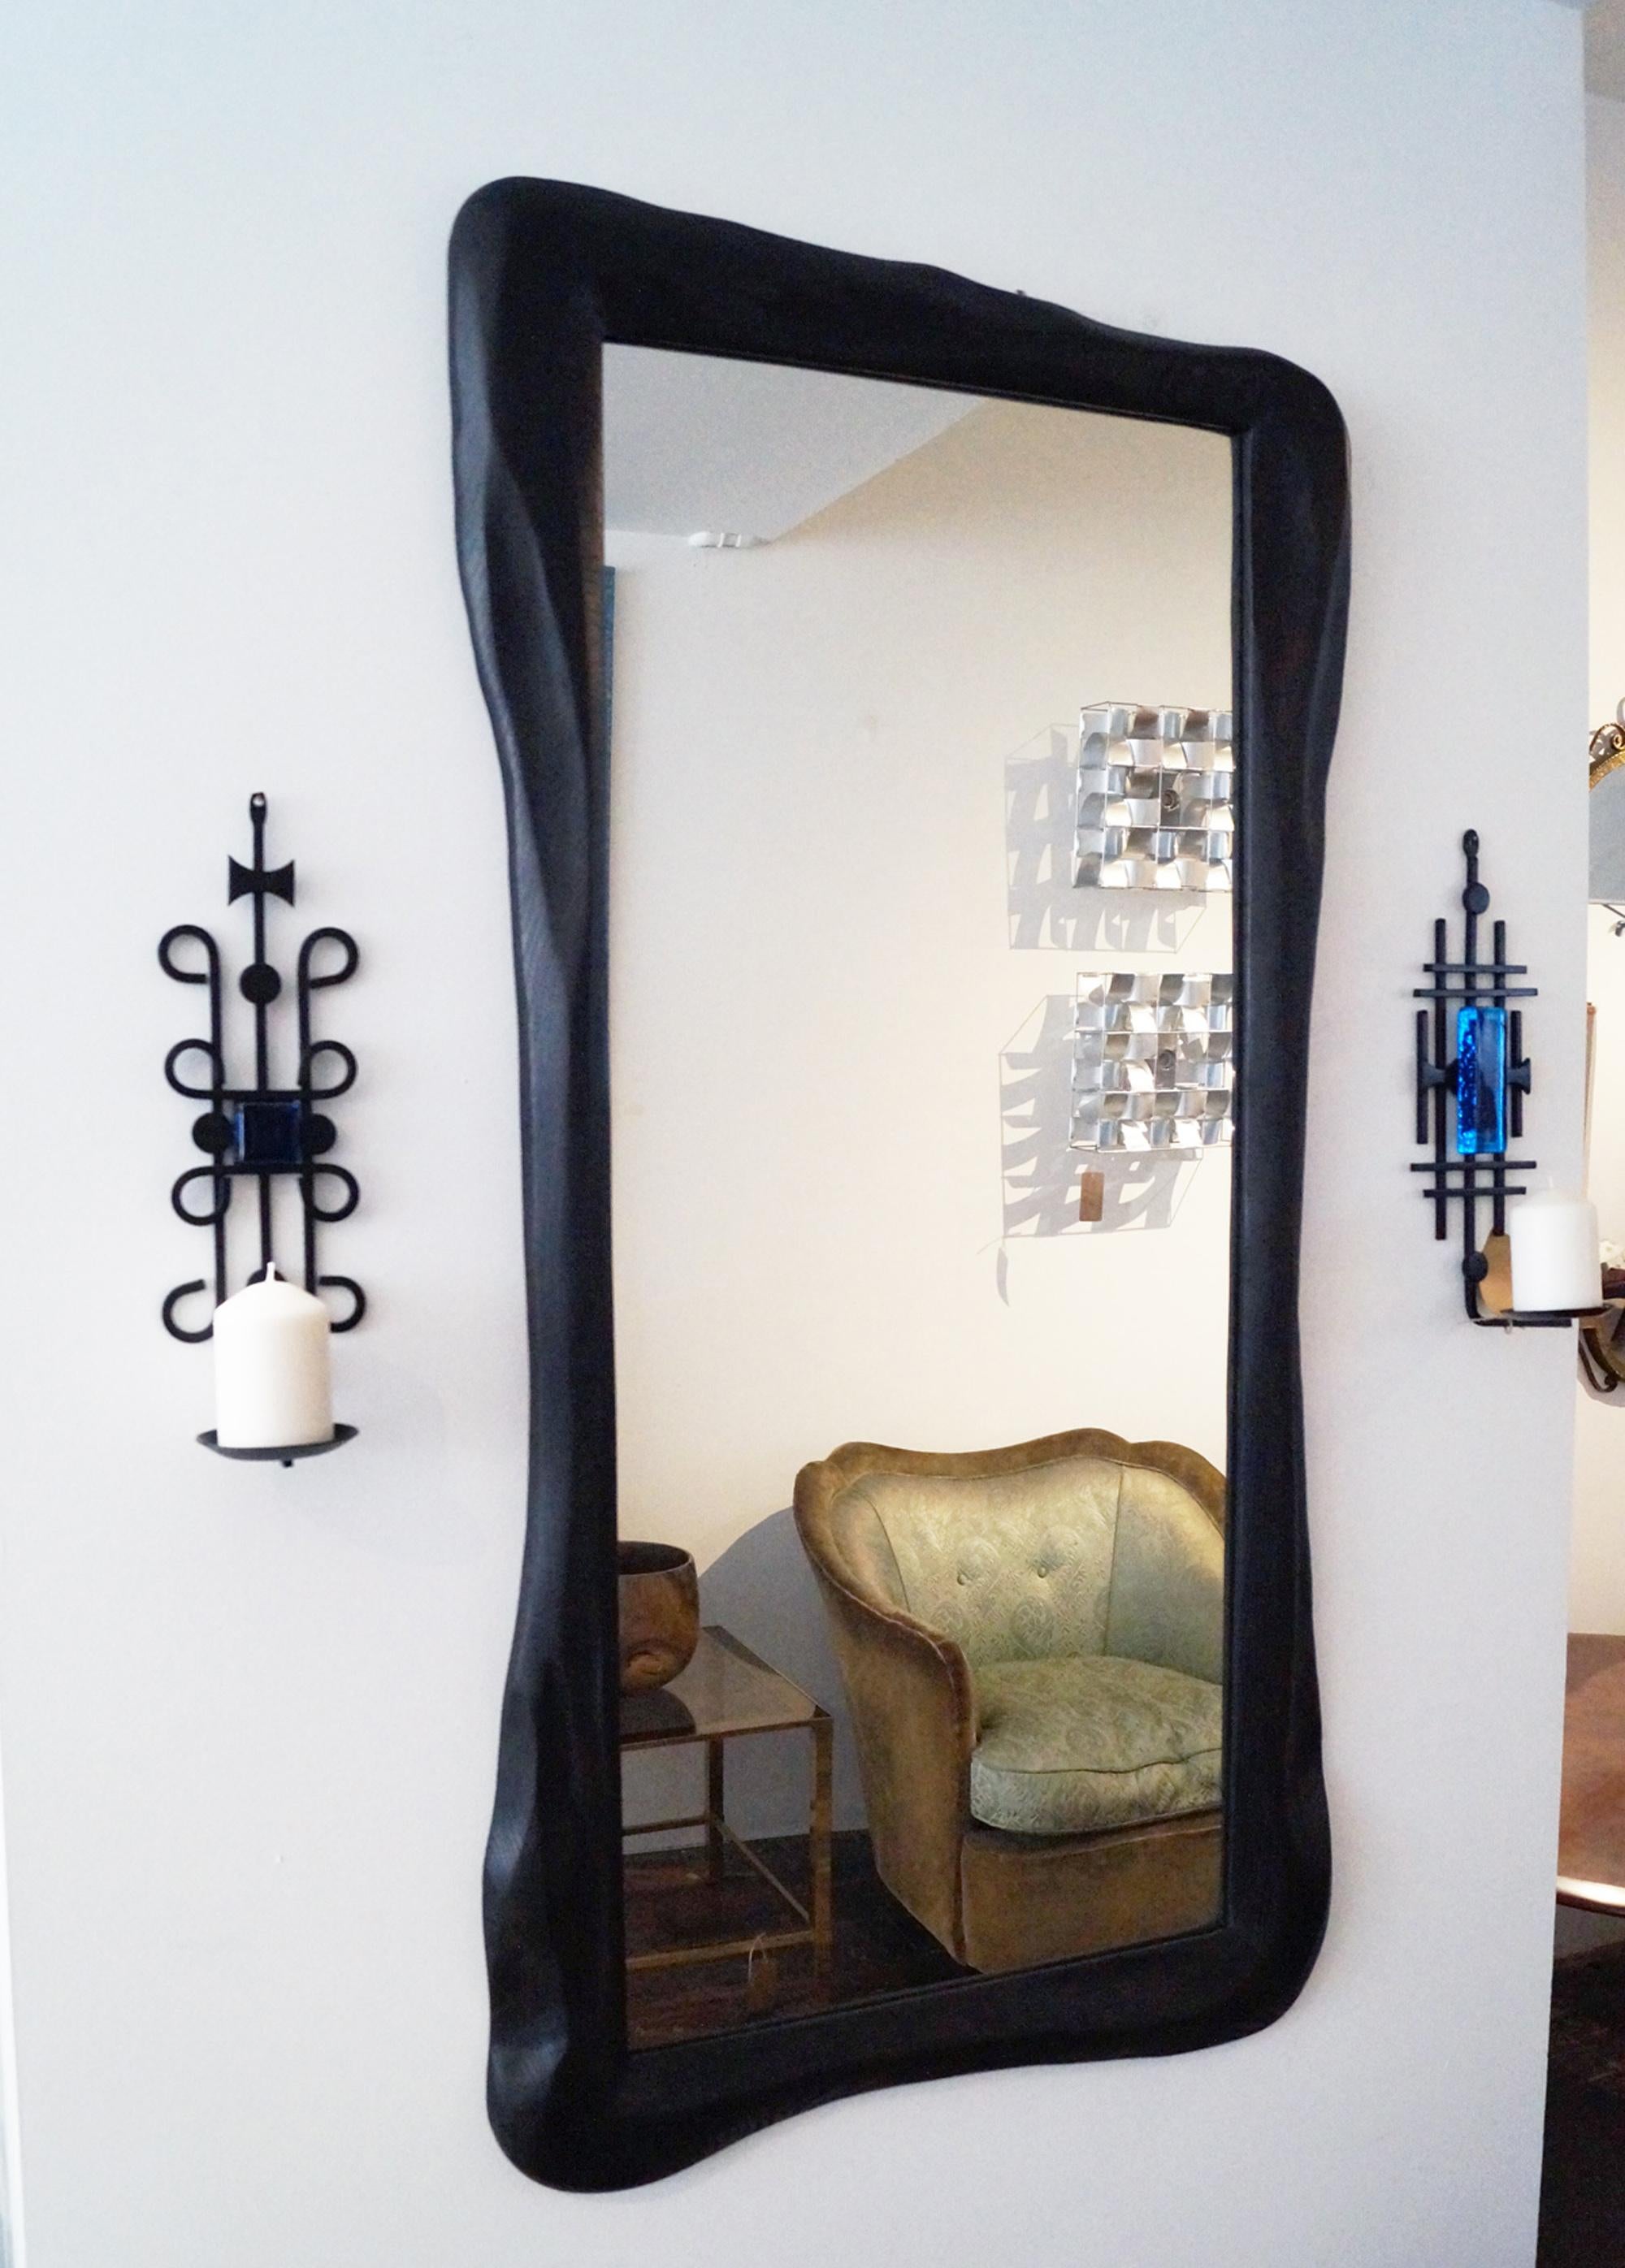 A stunning hand-carved ebonized mirror, handcrafted by artist-designer John Alfredo Harris. One-off piece. 
John Alfredo Harris's has been exhibited in various well-known galleries in Europe. All work is handcrafted and designed in his Studio in